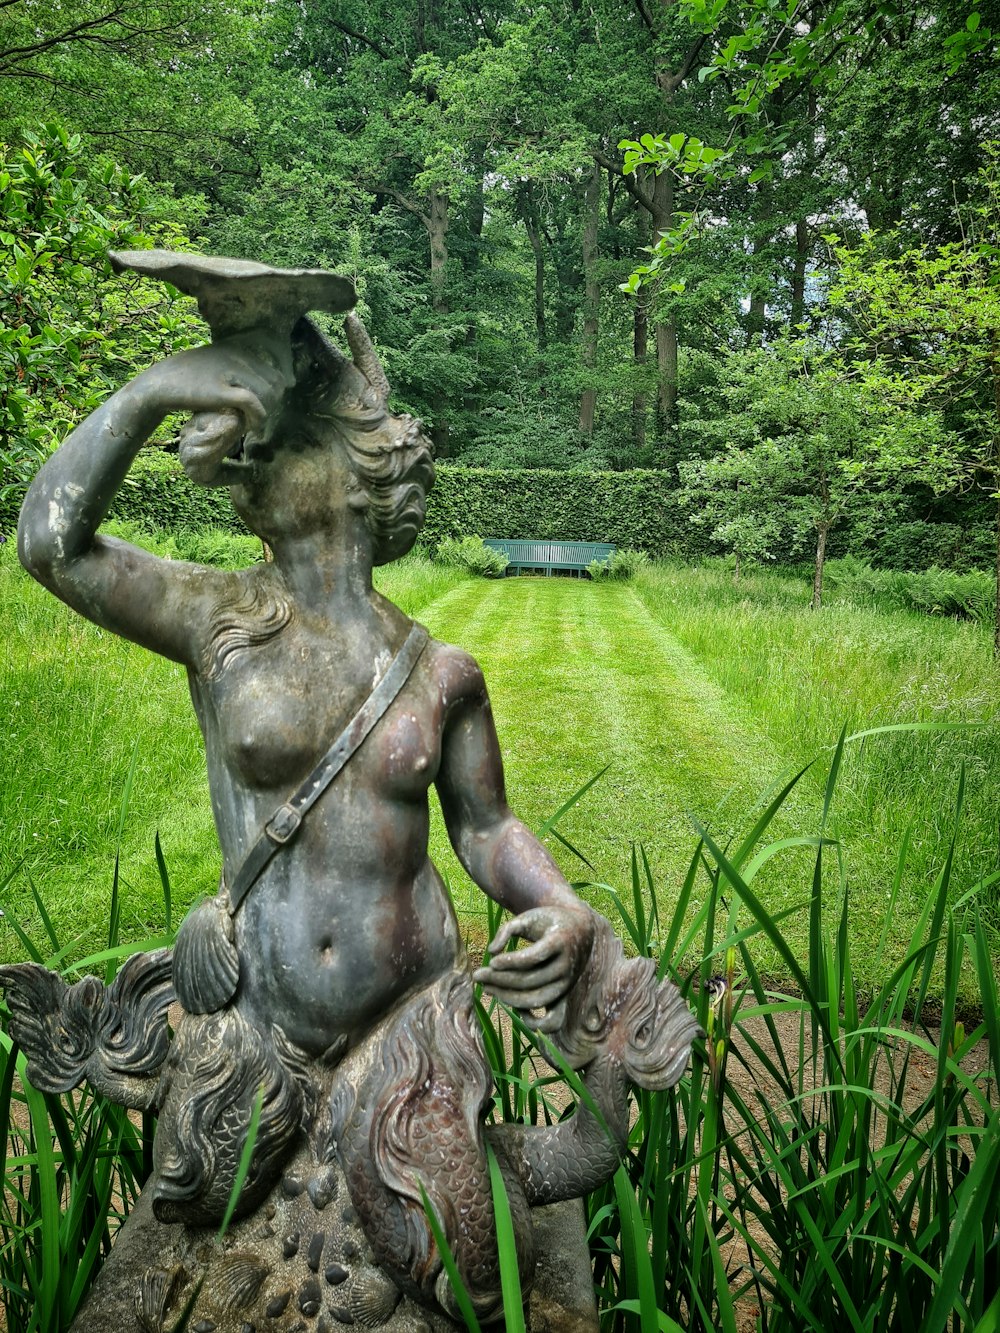 a statue of a woman holding a bird on her head